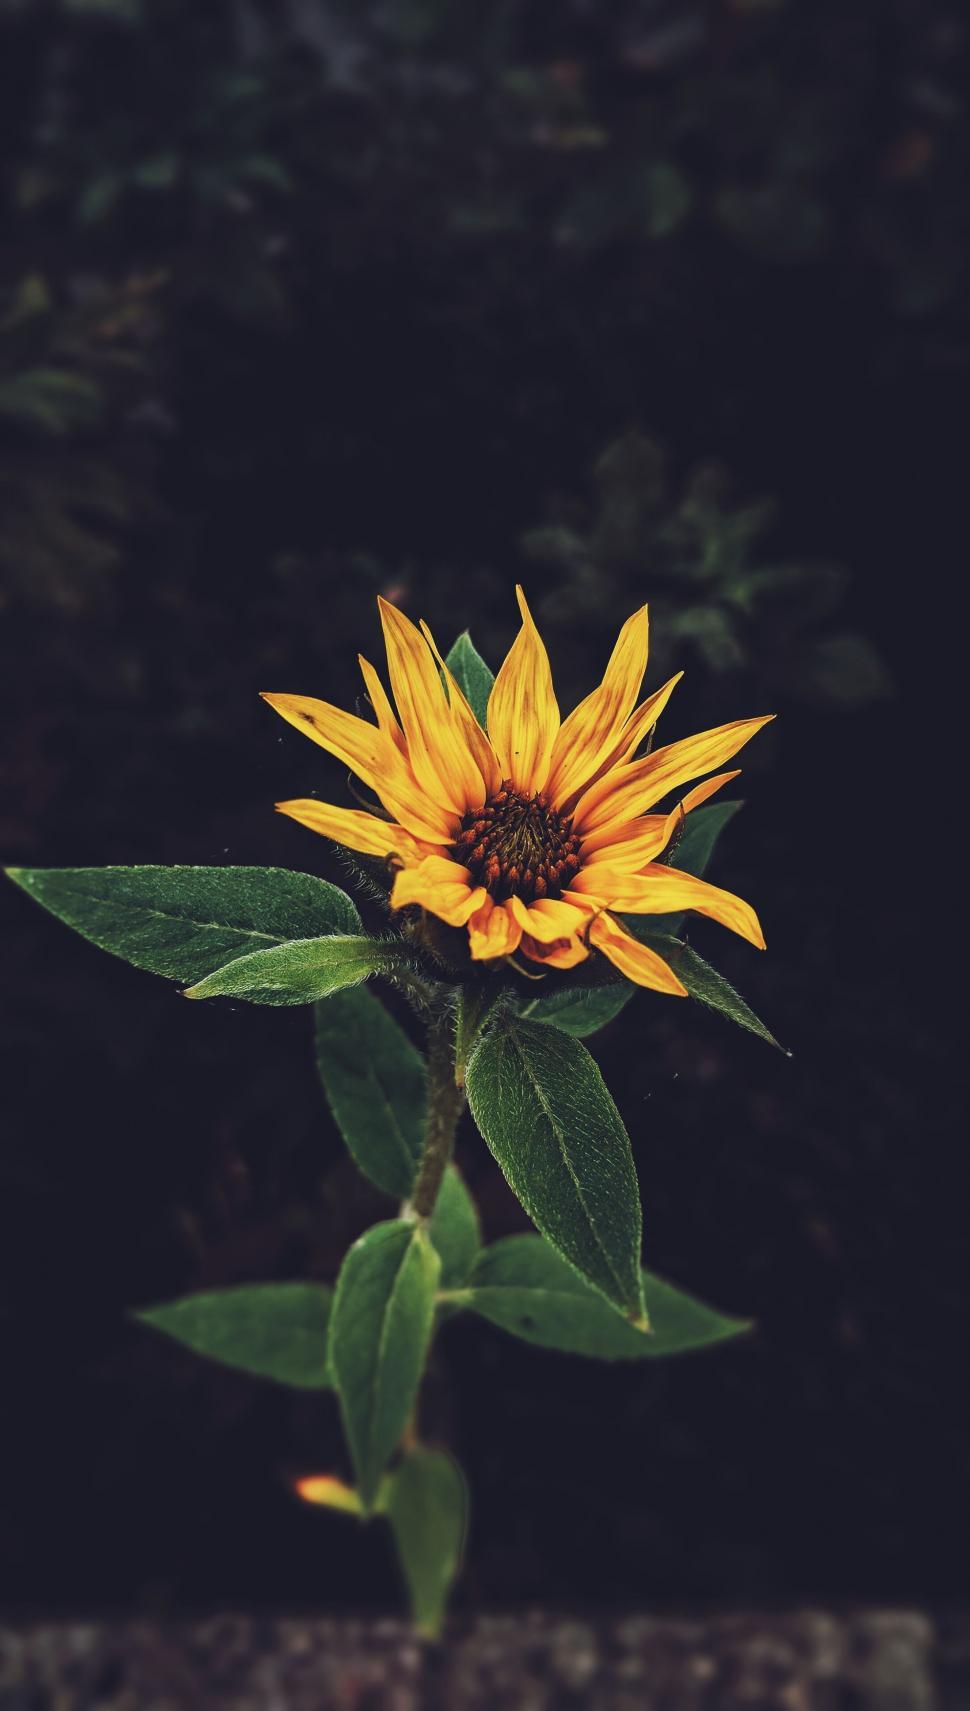 Free Image of Yellow Sunflower With Green Leaves on Black Background 